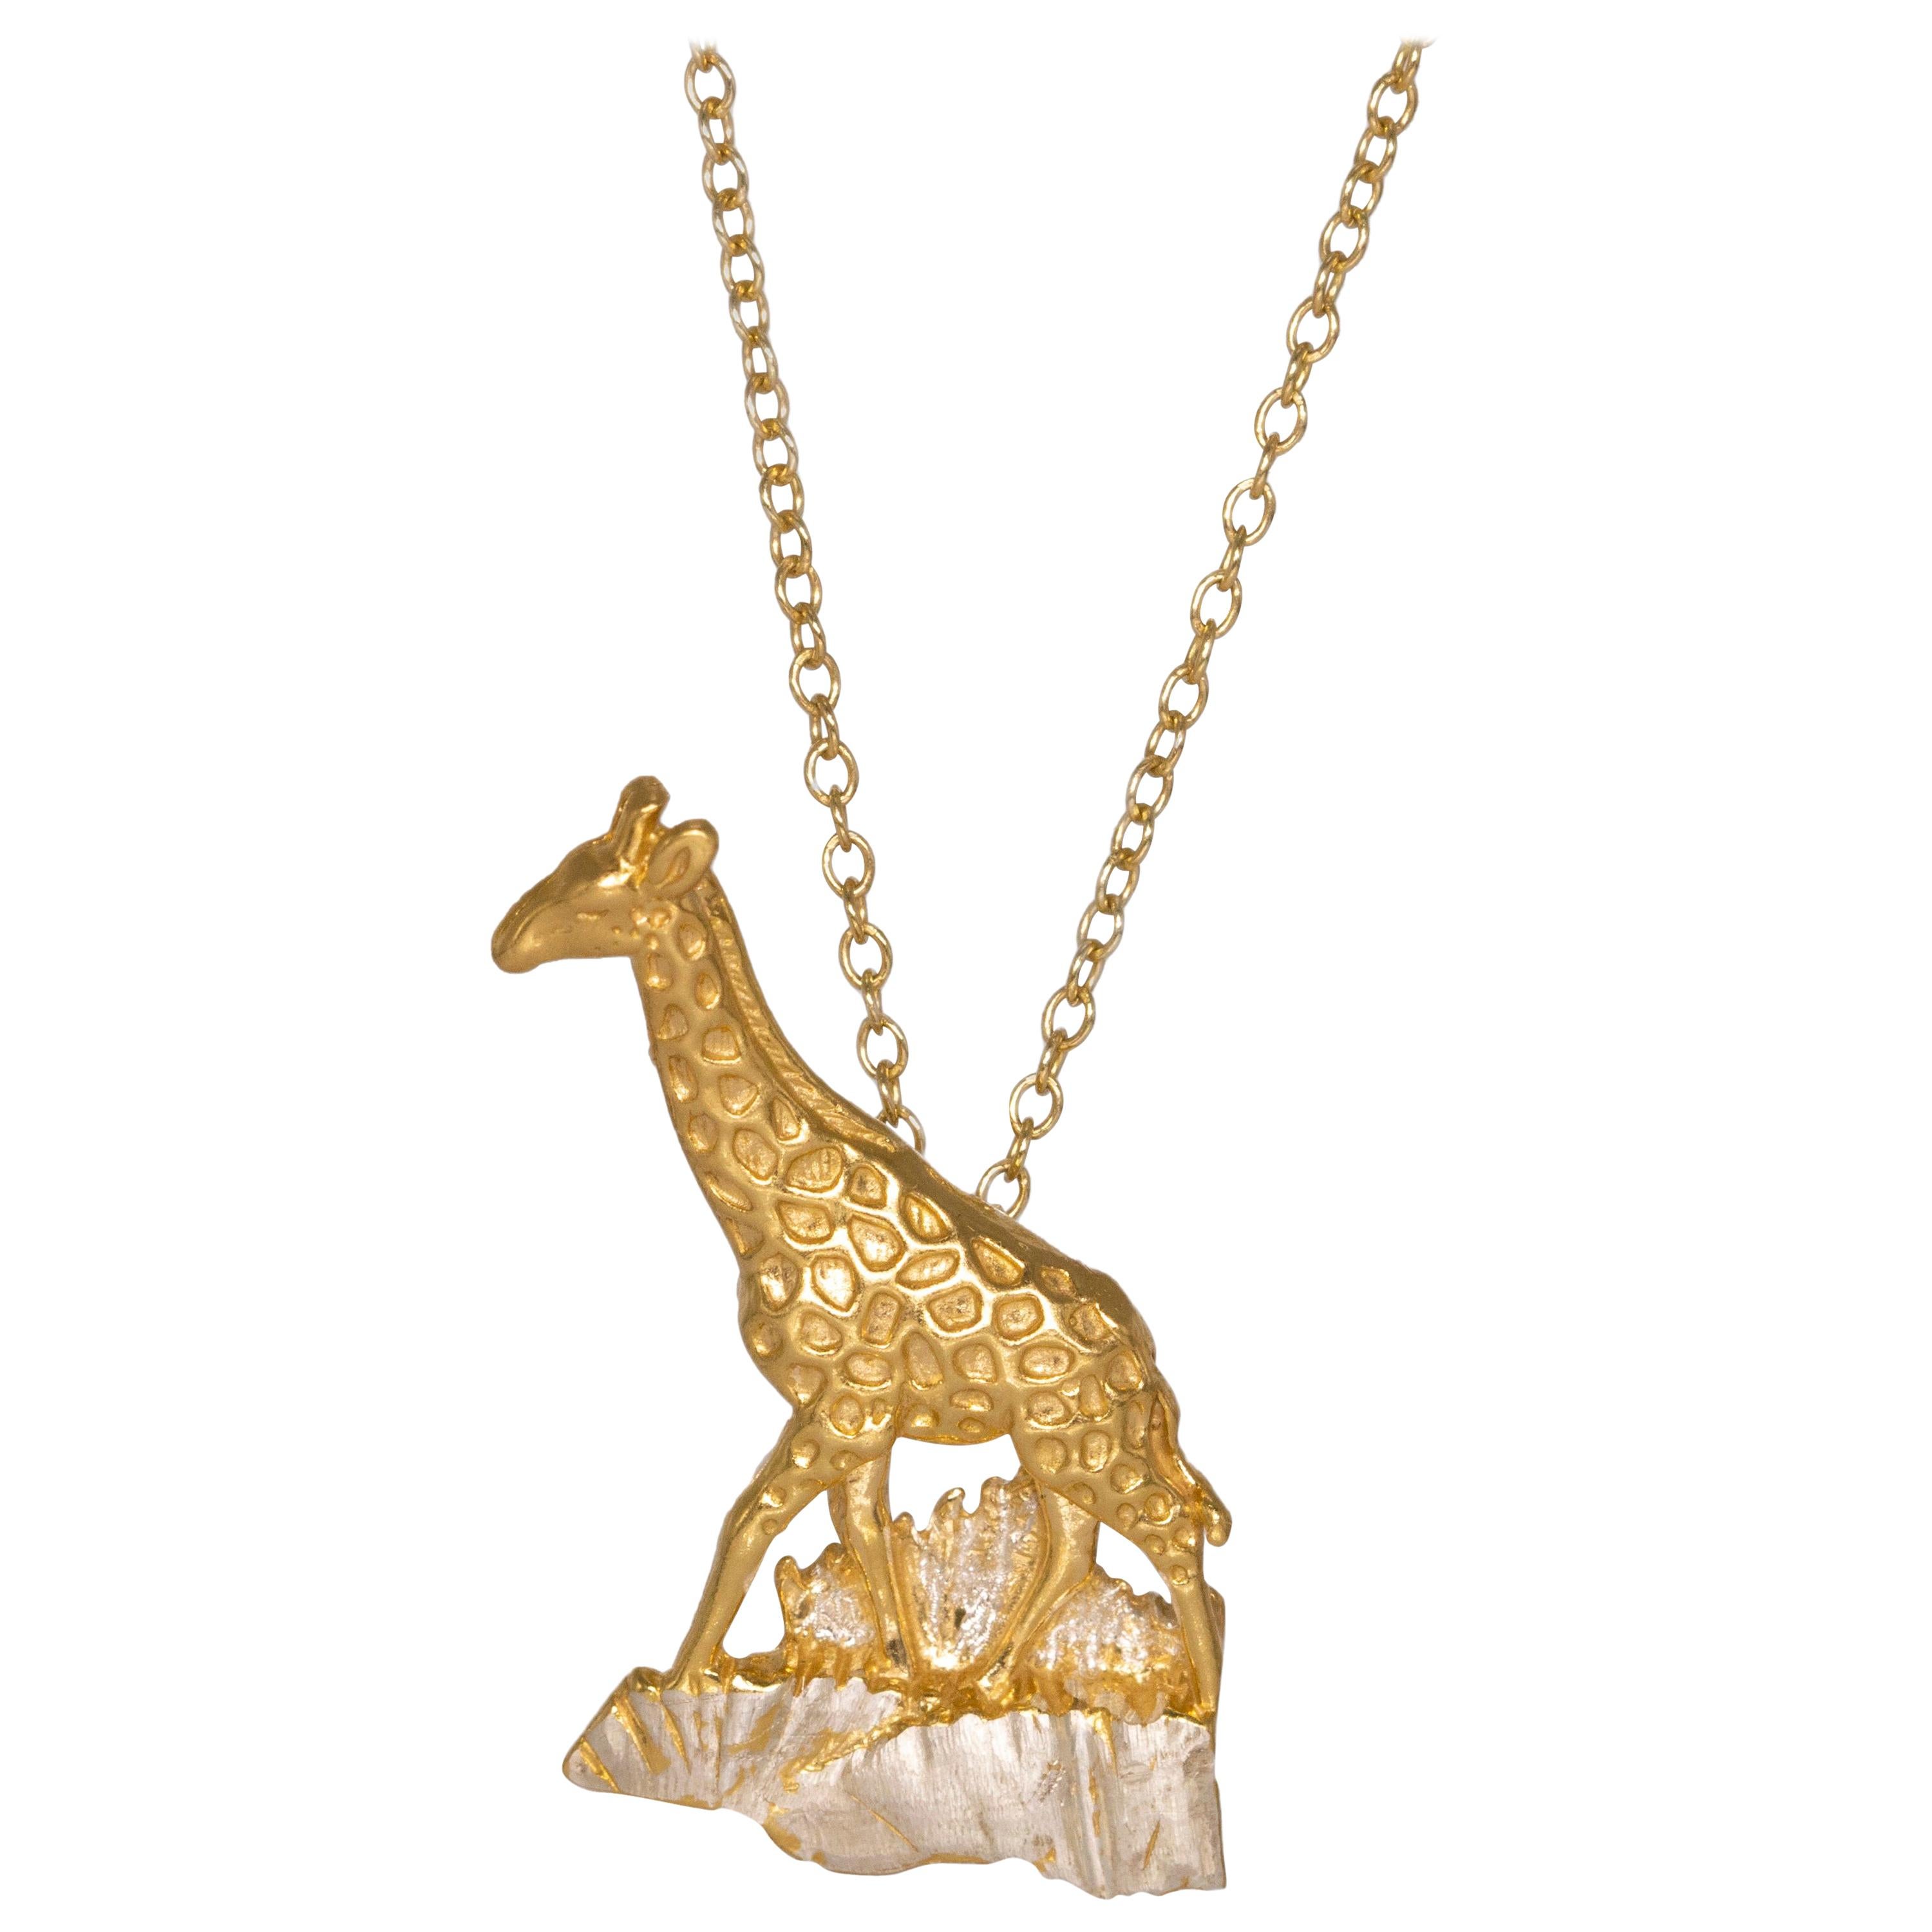 Giraffe Pendant in 18 carat Gold on Sterling Silver For Sale